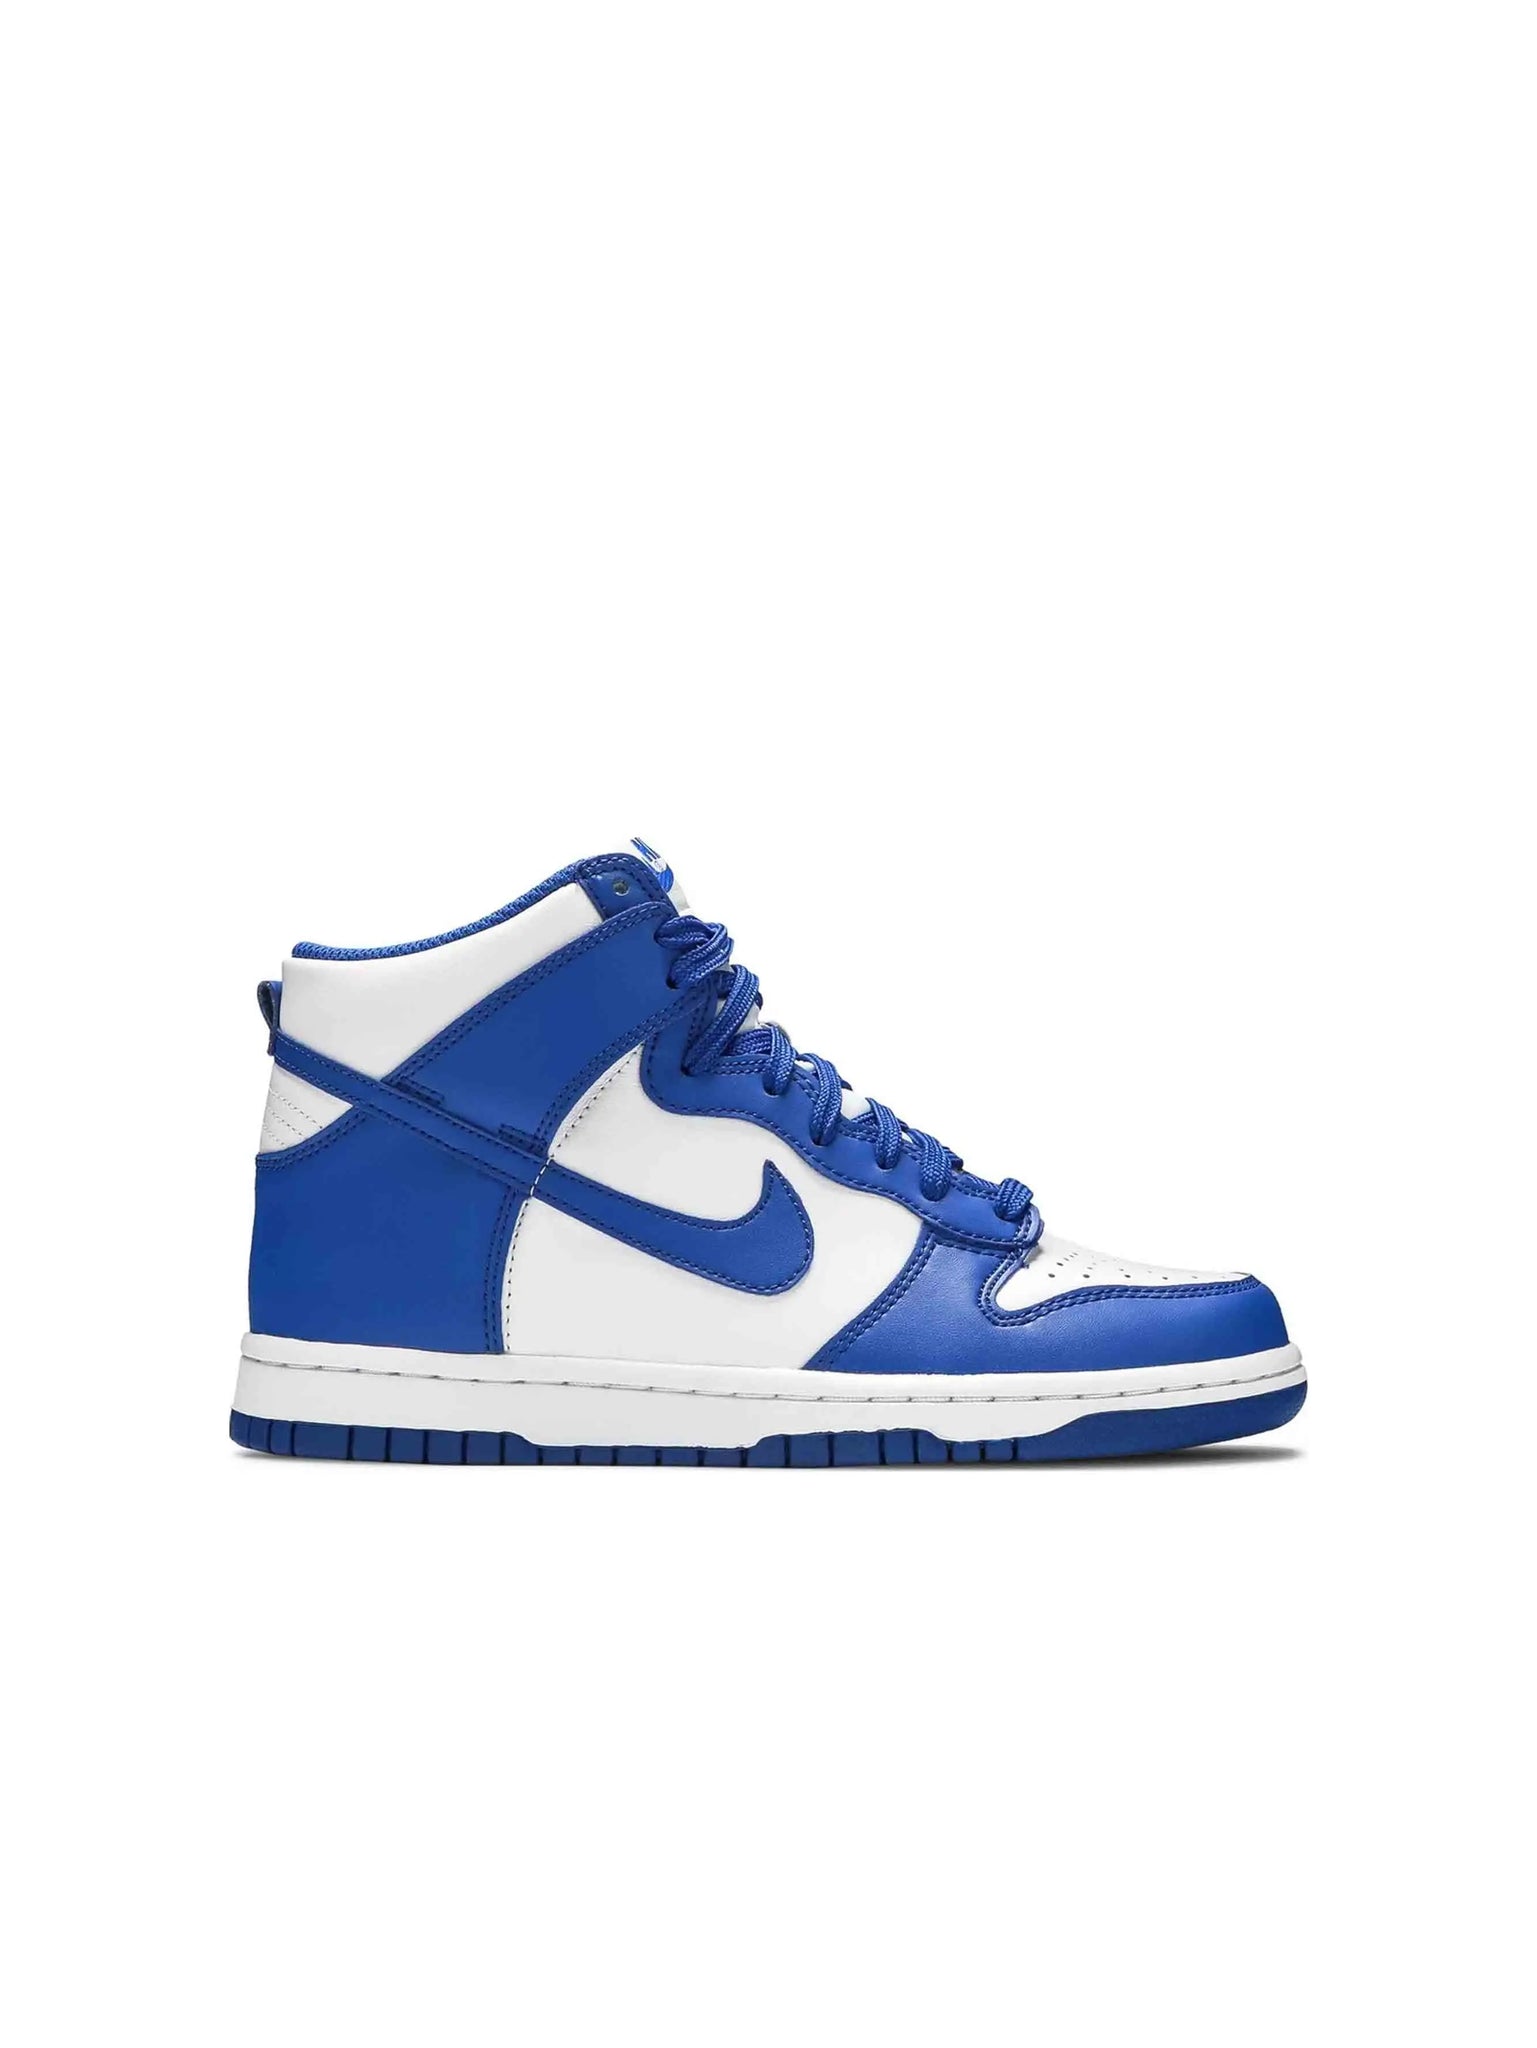 Nike Dunk High Game Royal (GS) in Auckland, New Zealand - Shop name